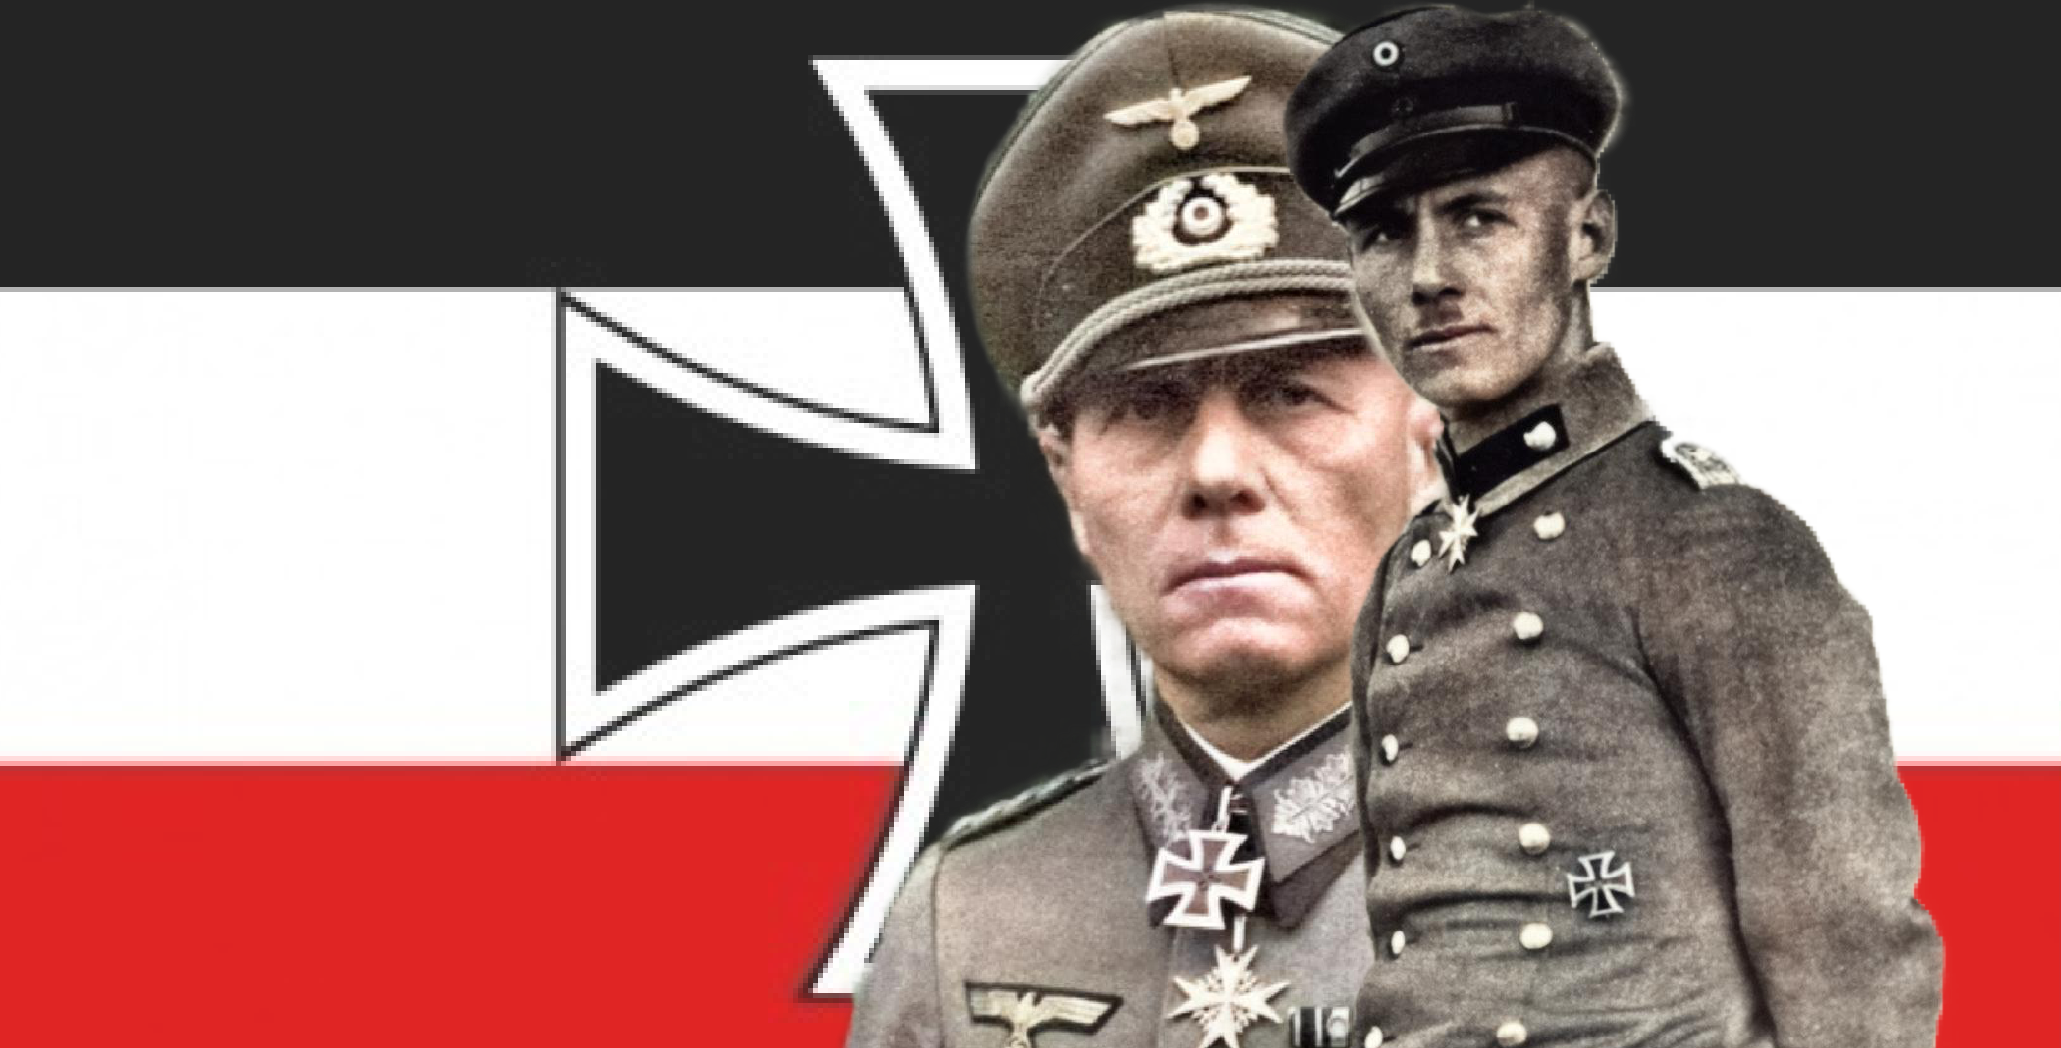 World War One The Early Years Of Erwin Rommel War History Online